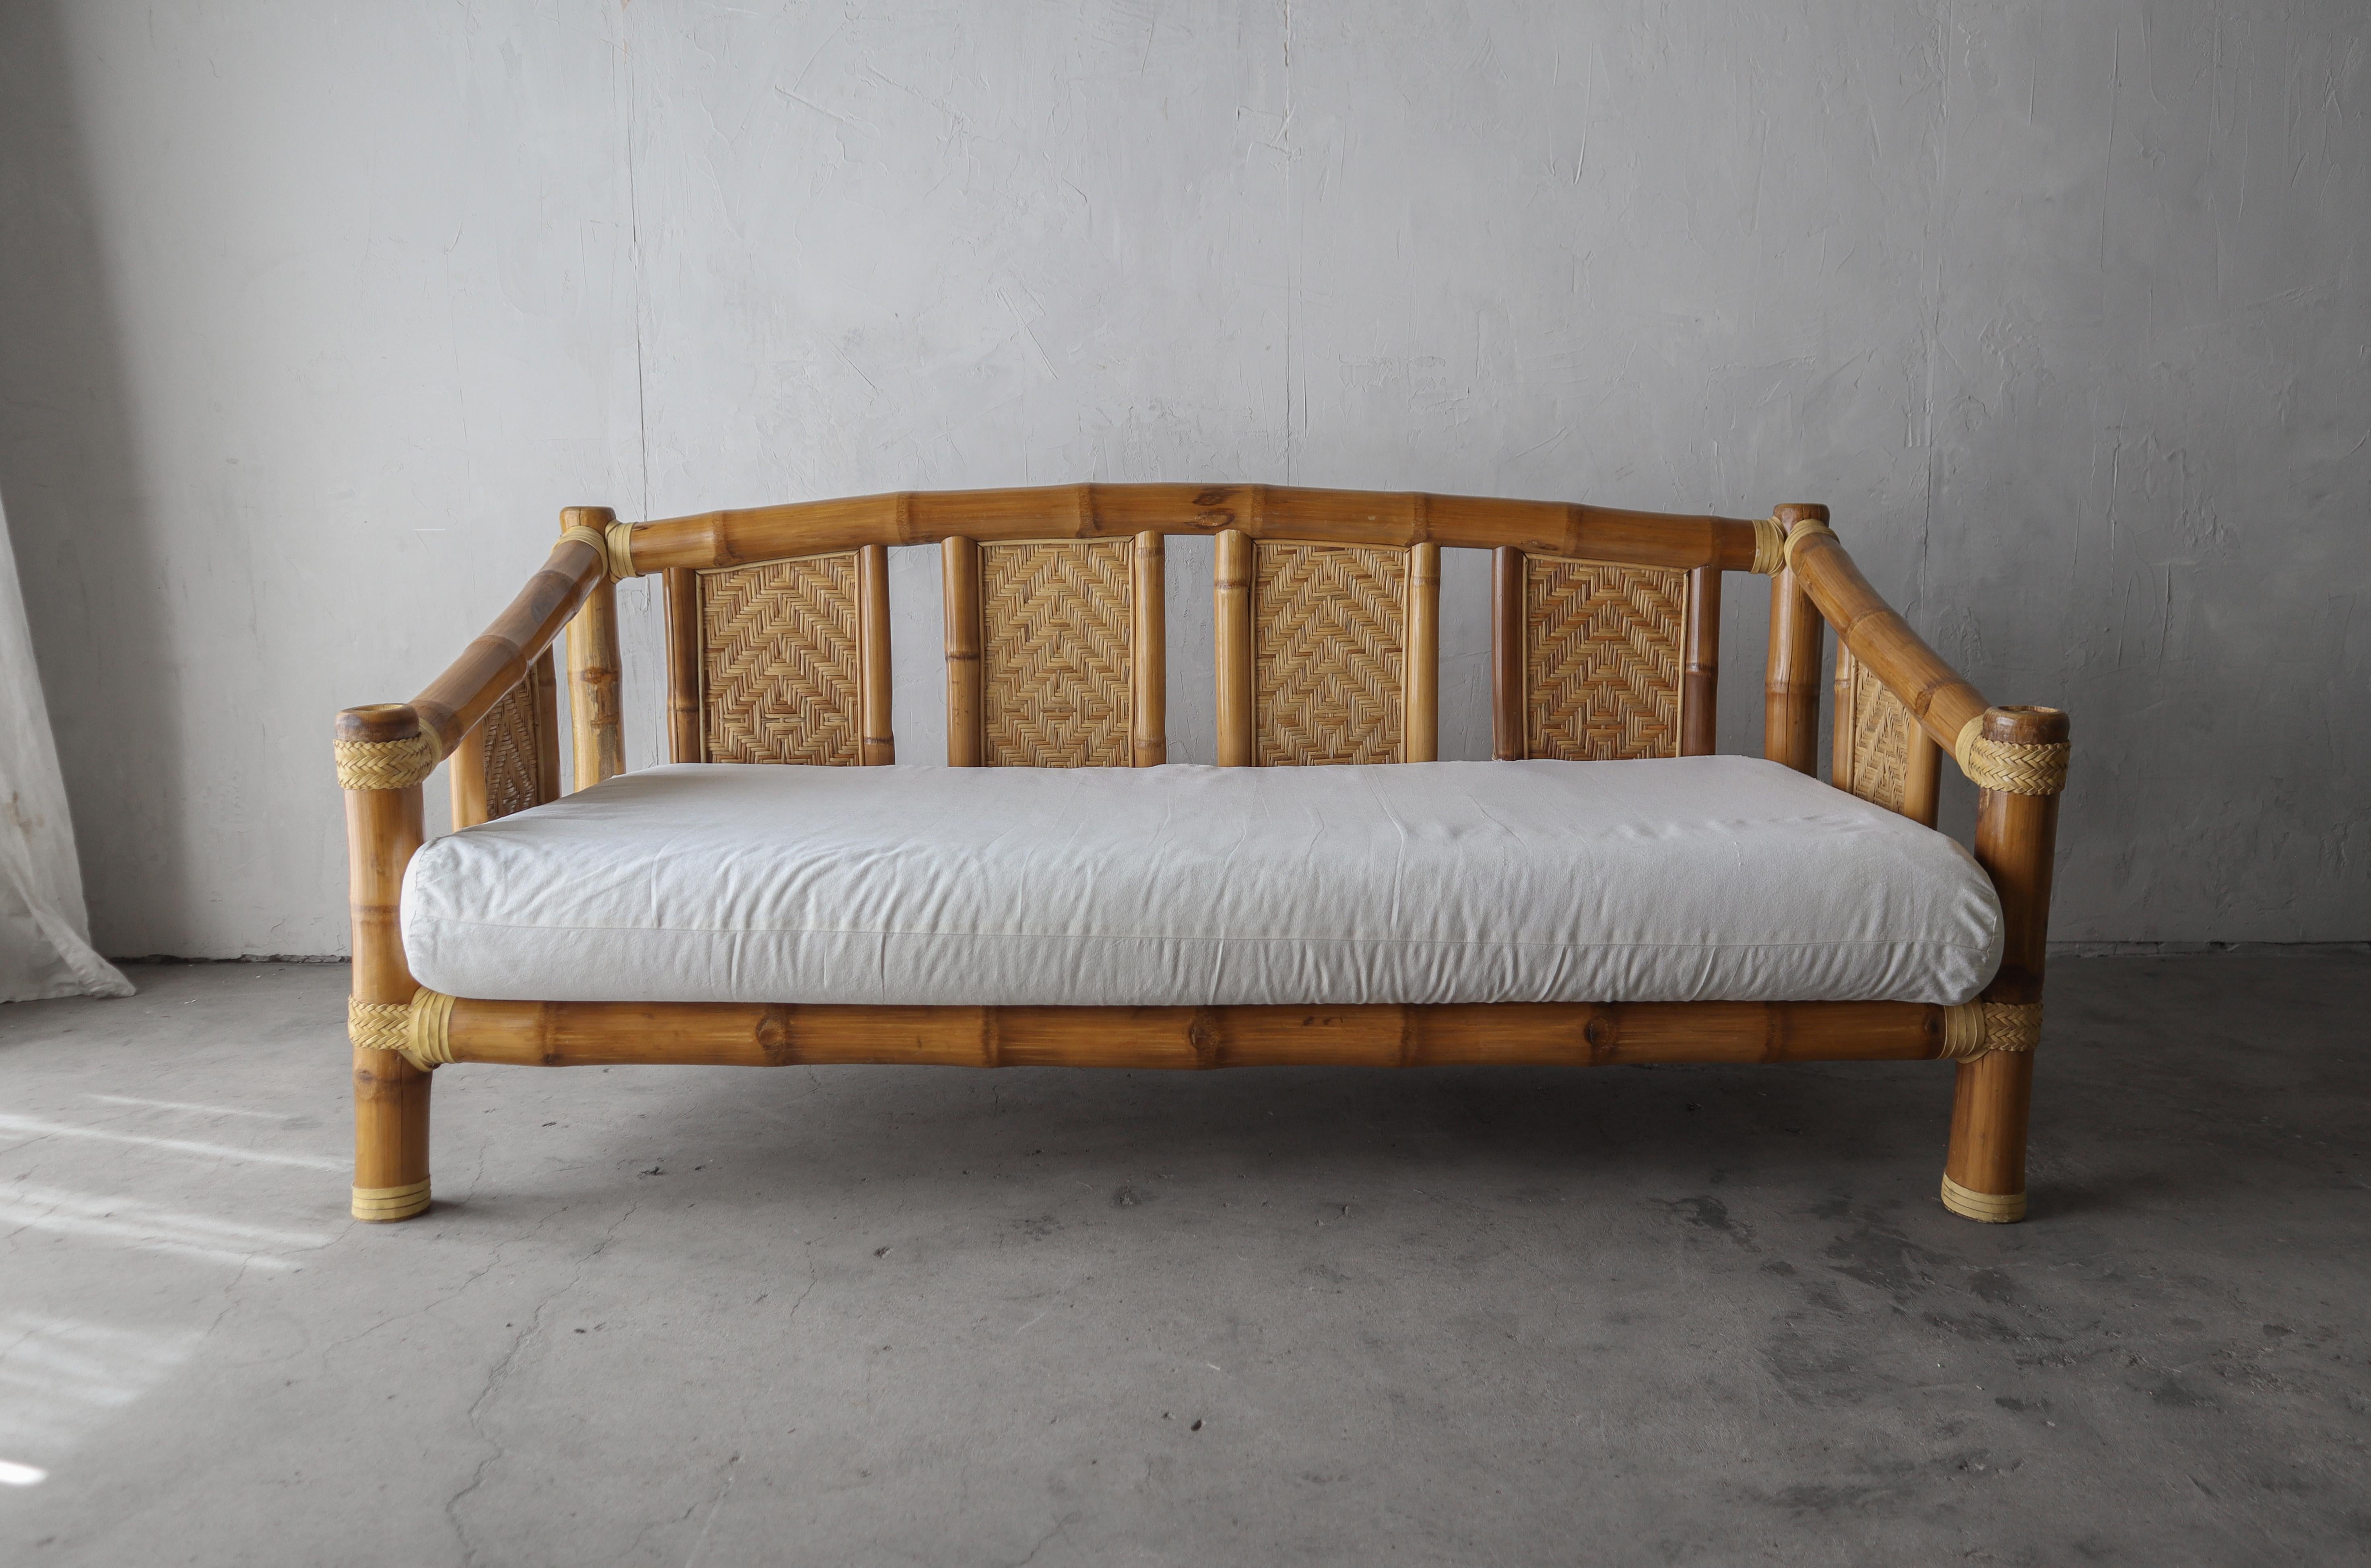 What a unique and special piece. The oversized bamboo really makes this massive vintage daybed sofa a super cool and artistic piece. If you have been looking for real statement piece, look no further.

The bamboo is in excellent and 100%